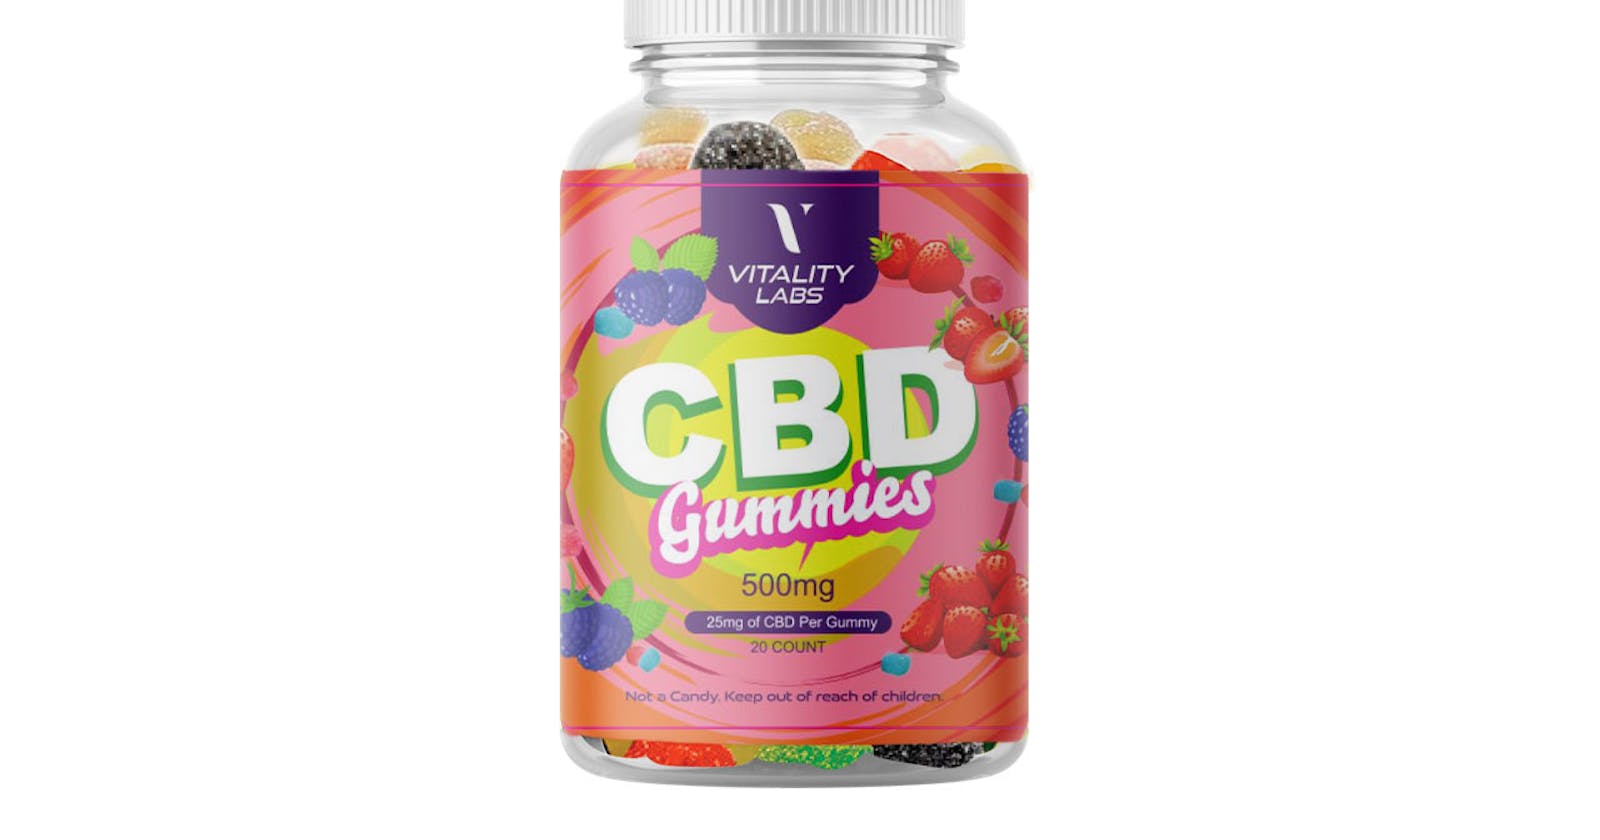 Vitality Labs CBD Gummies Reviews Scam Alert! Don’t Take Before Know This